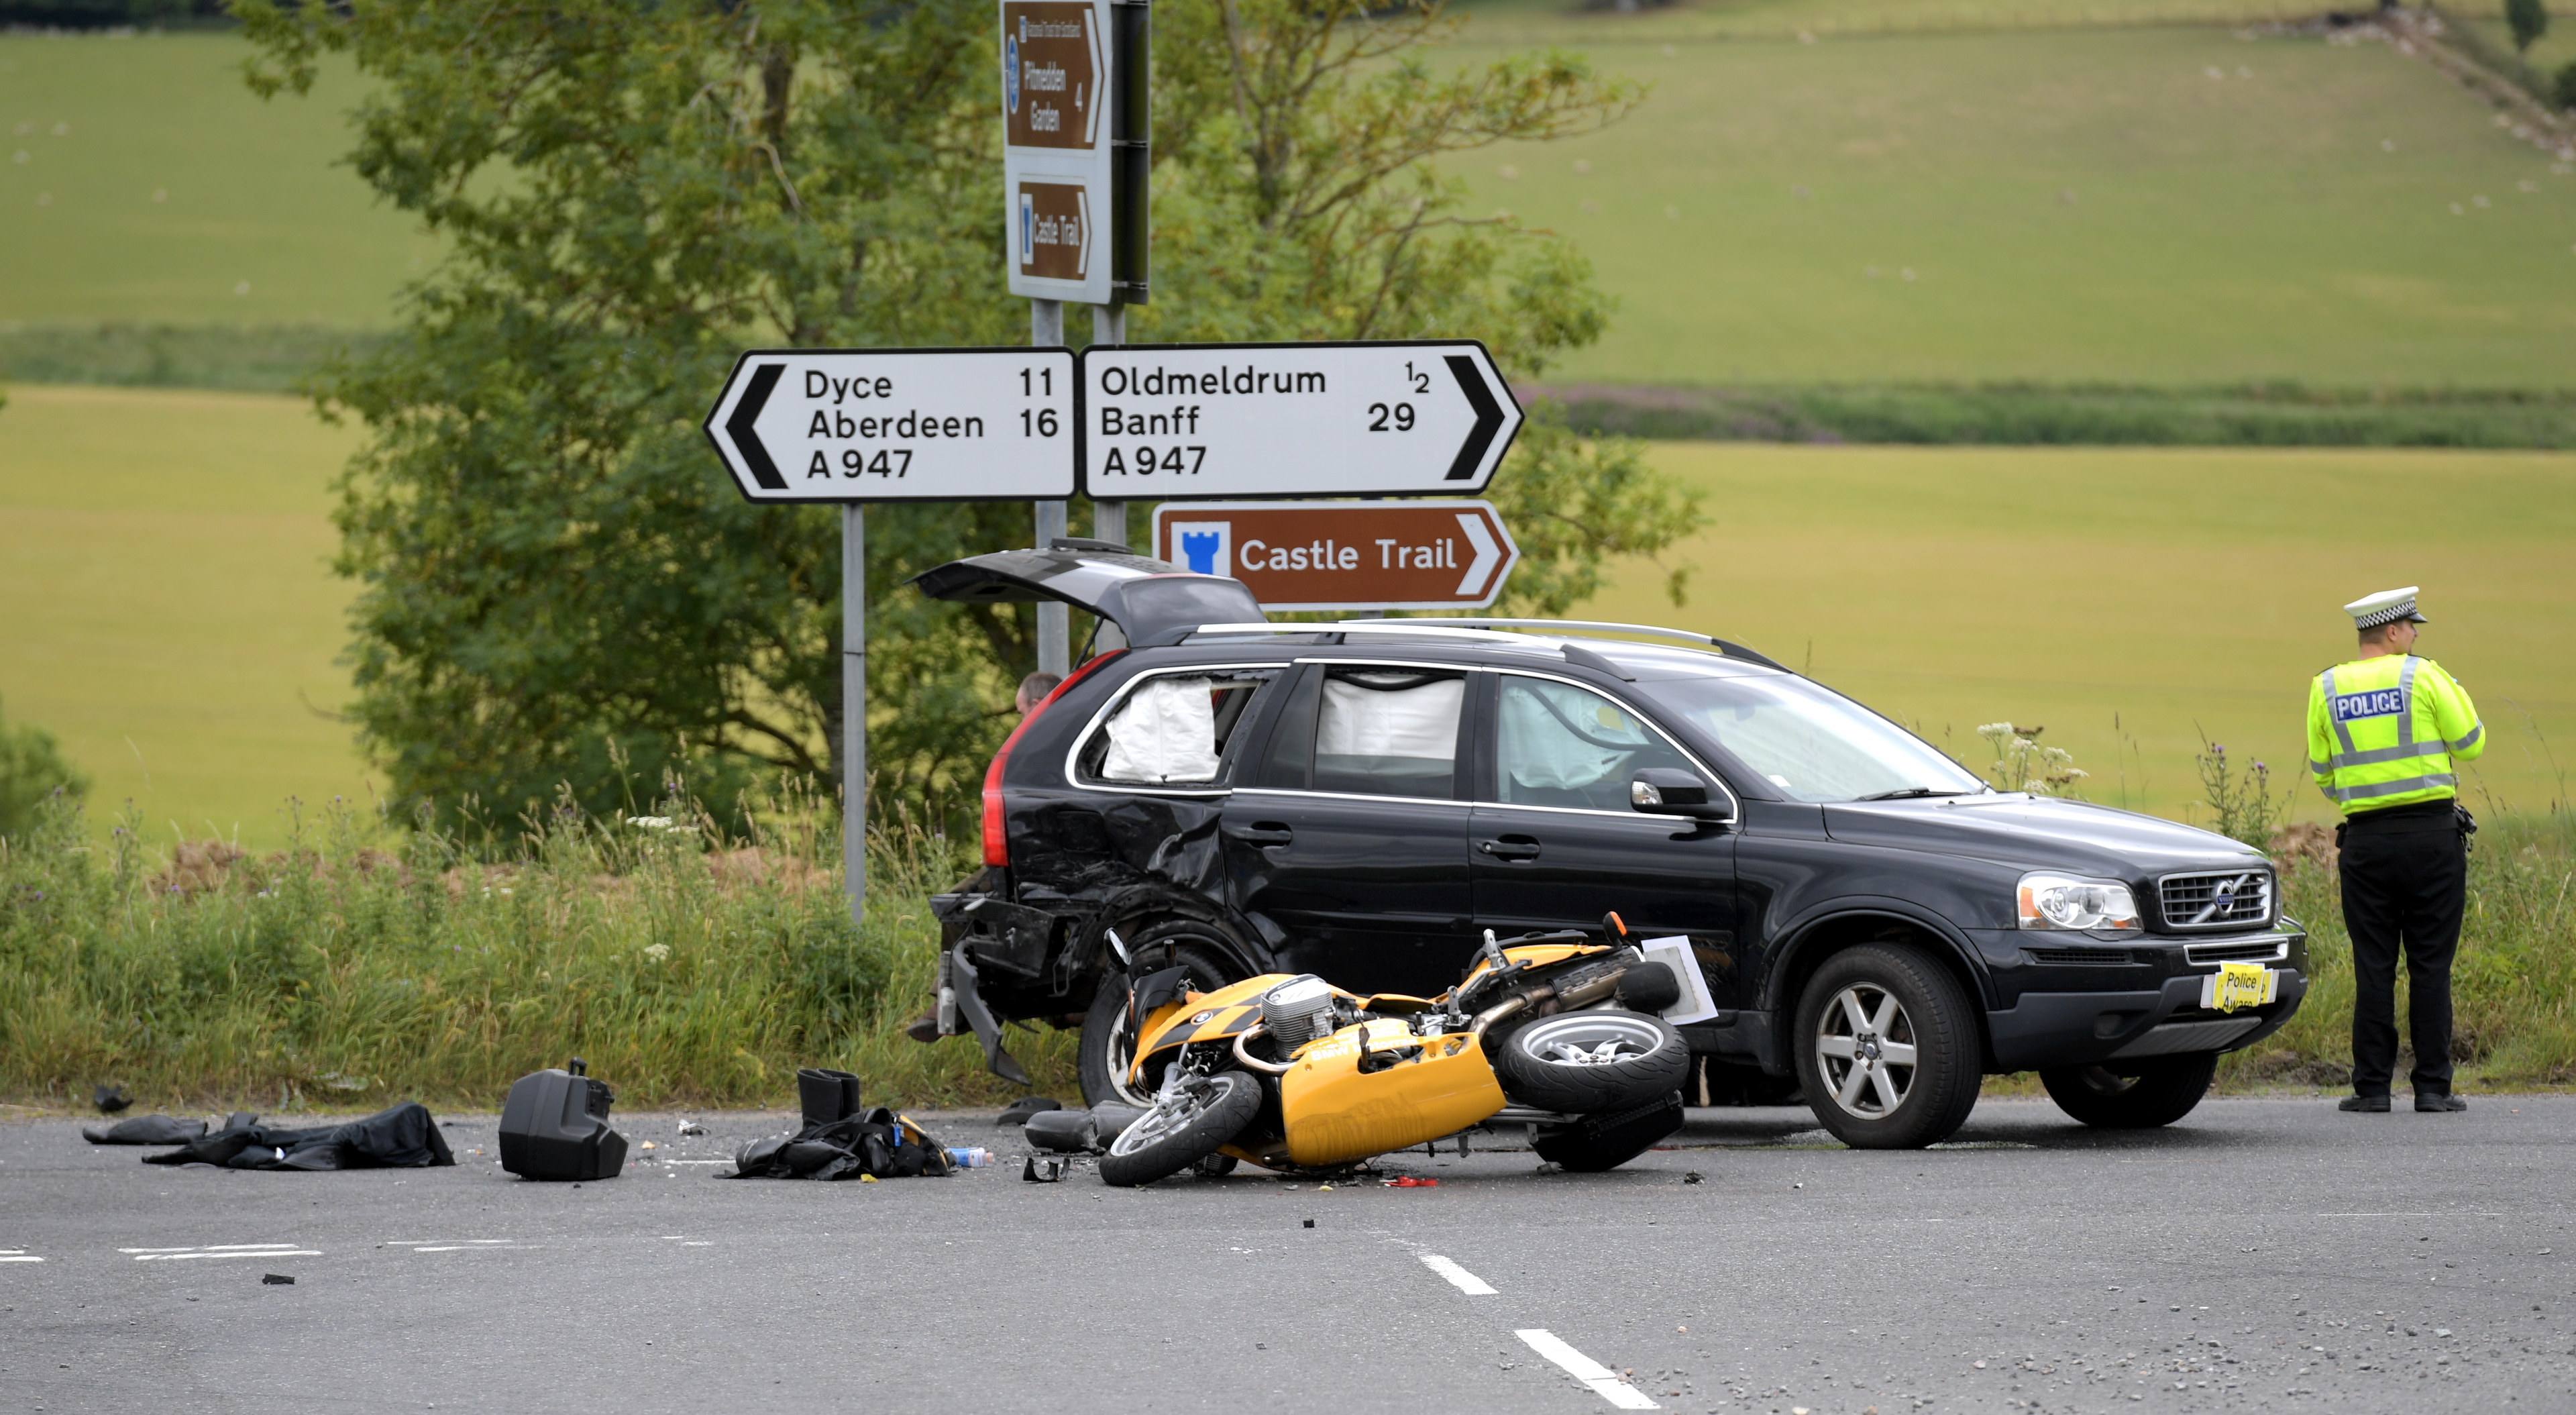 RTC on the A947 near Oldmeldrum.
08/07/18.
Picture by KATH FLANNERY